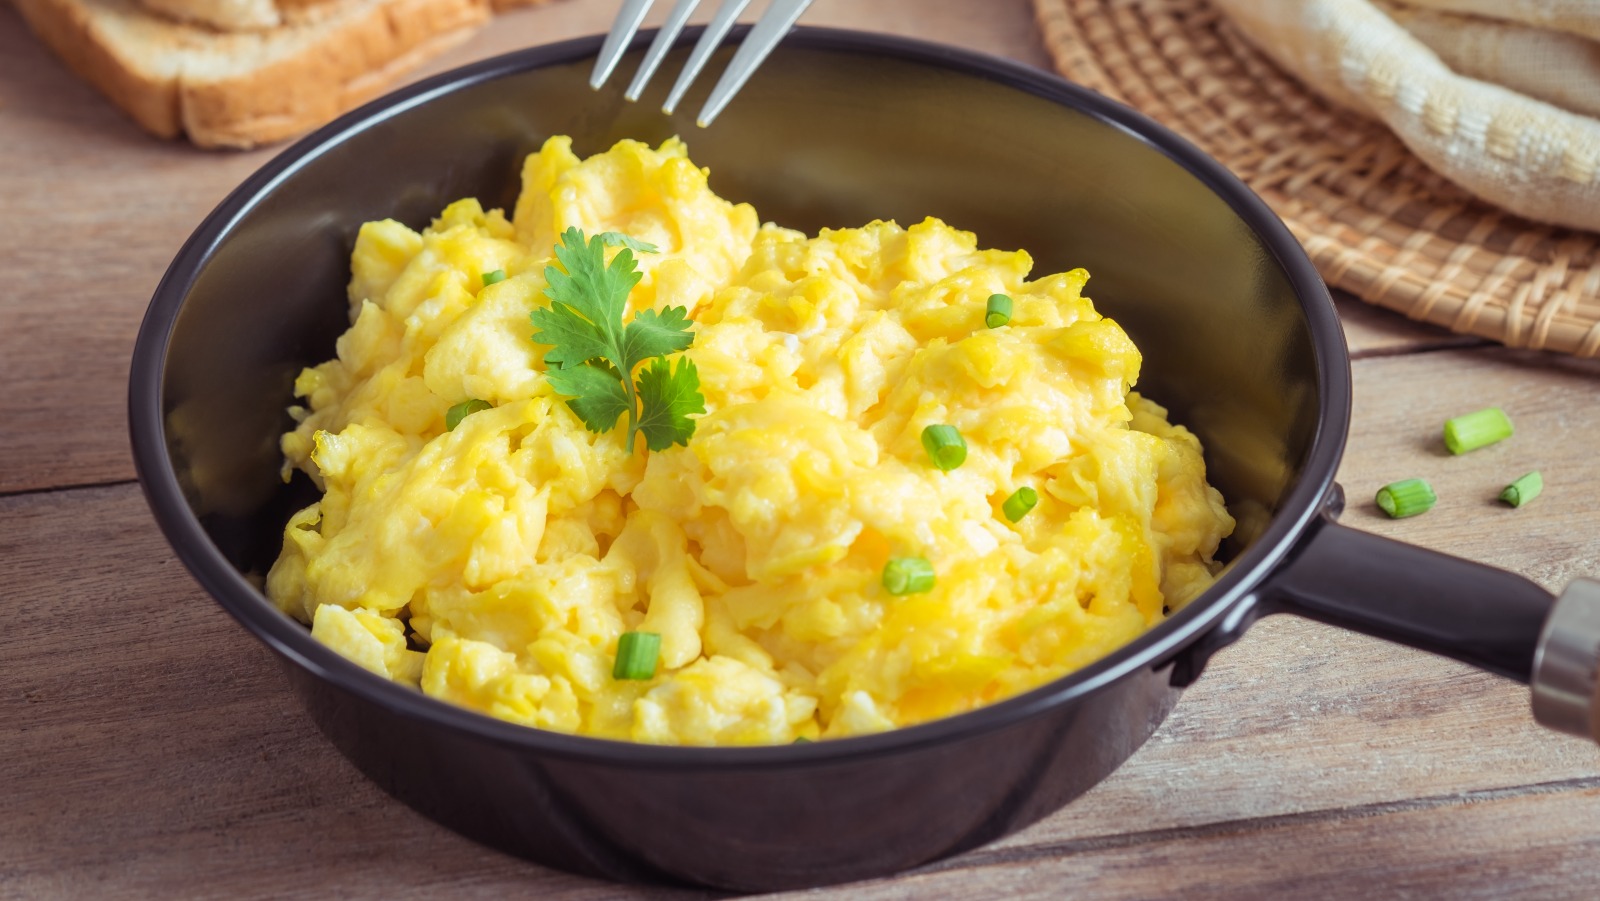 Why You Should Add Sparkling Wine To Your Scrambled Eggs